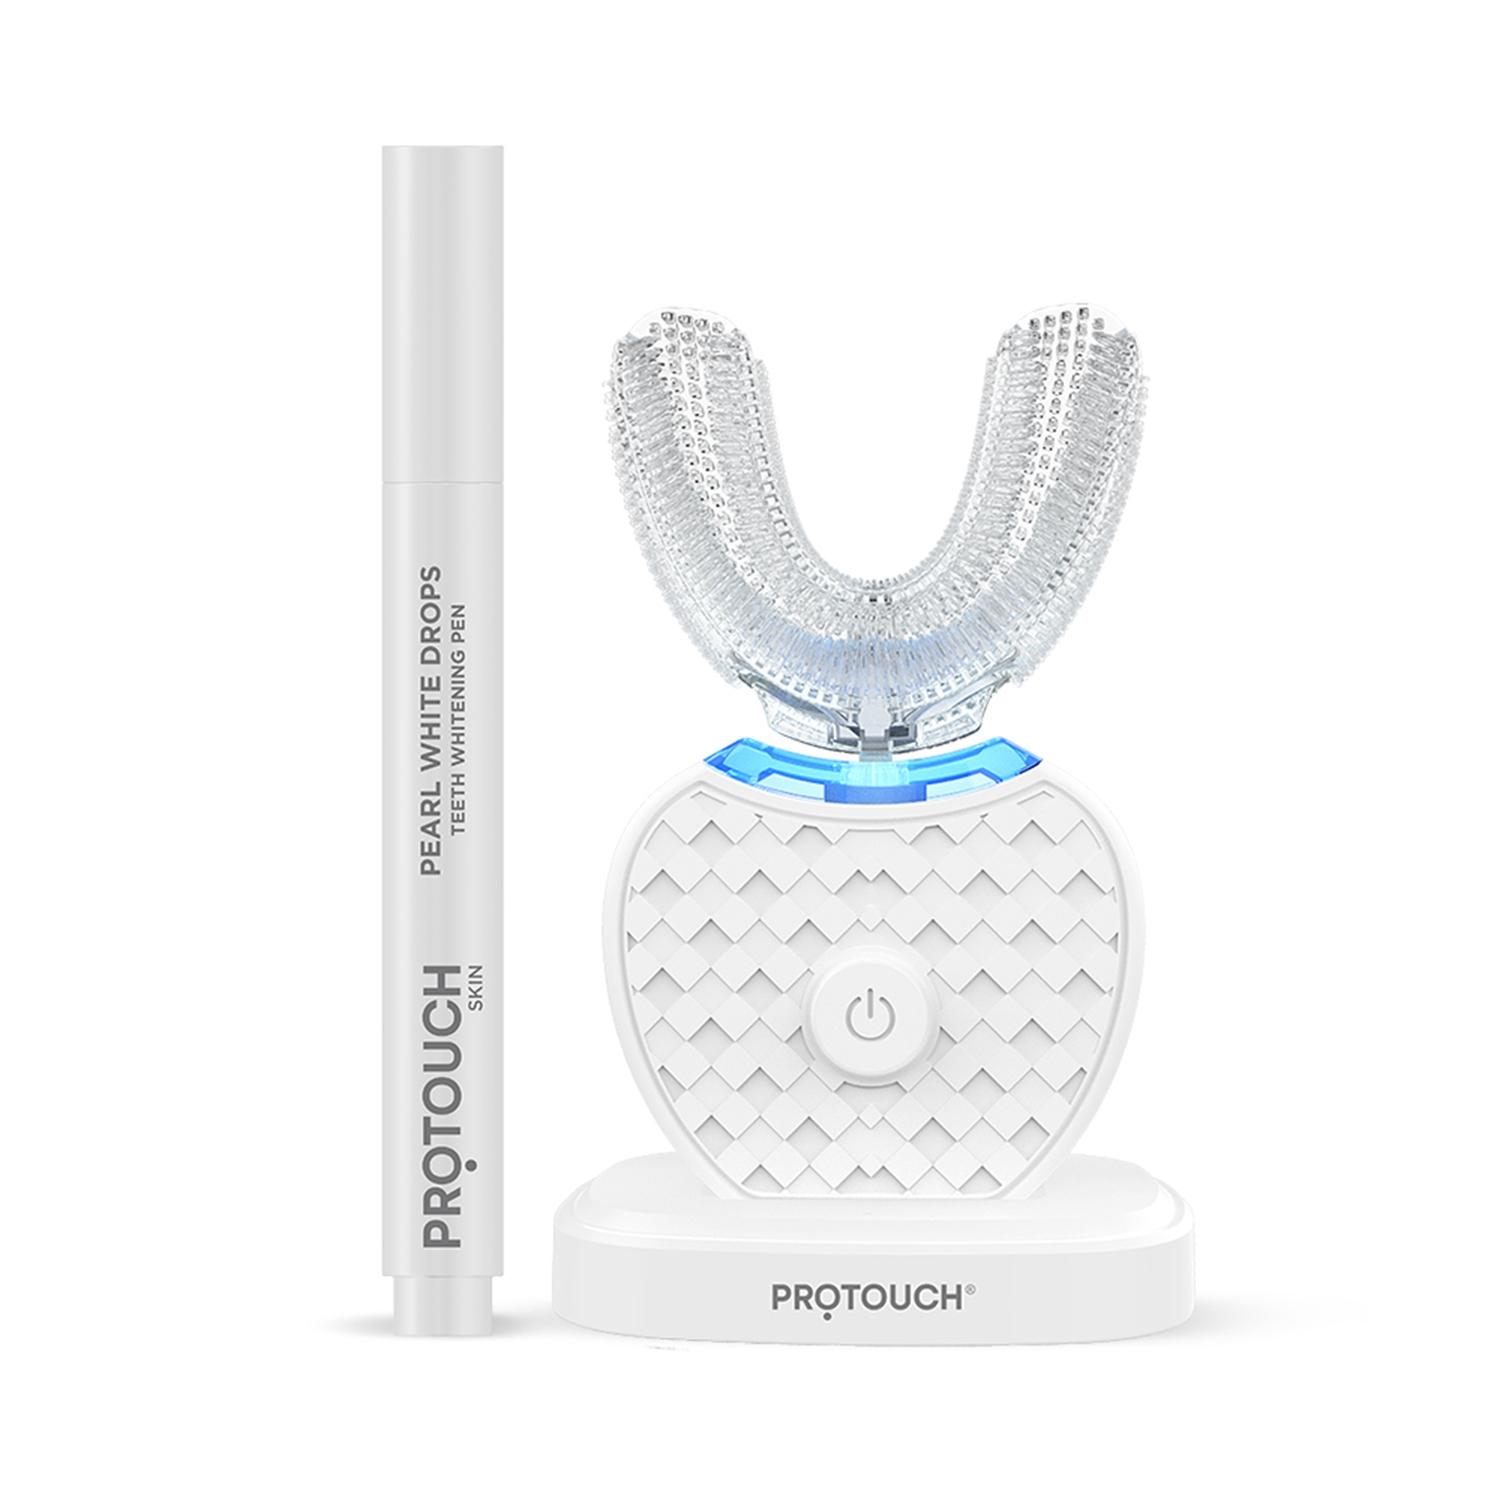 Protouch | Protouch Complete Teeth Whitening Combo - Teeth Whitening, Cavity Prevention & Fresher breath